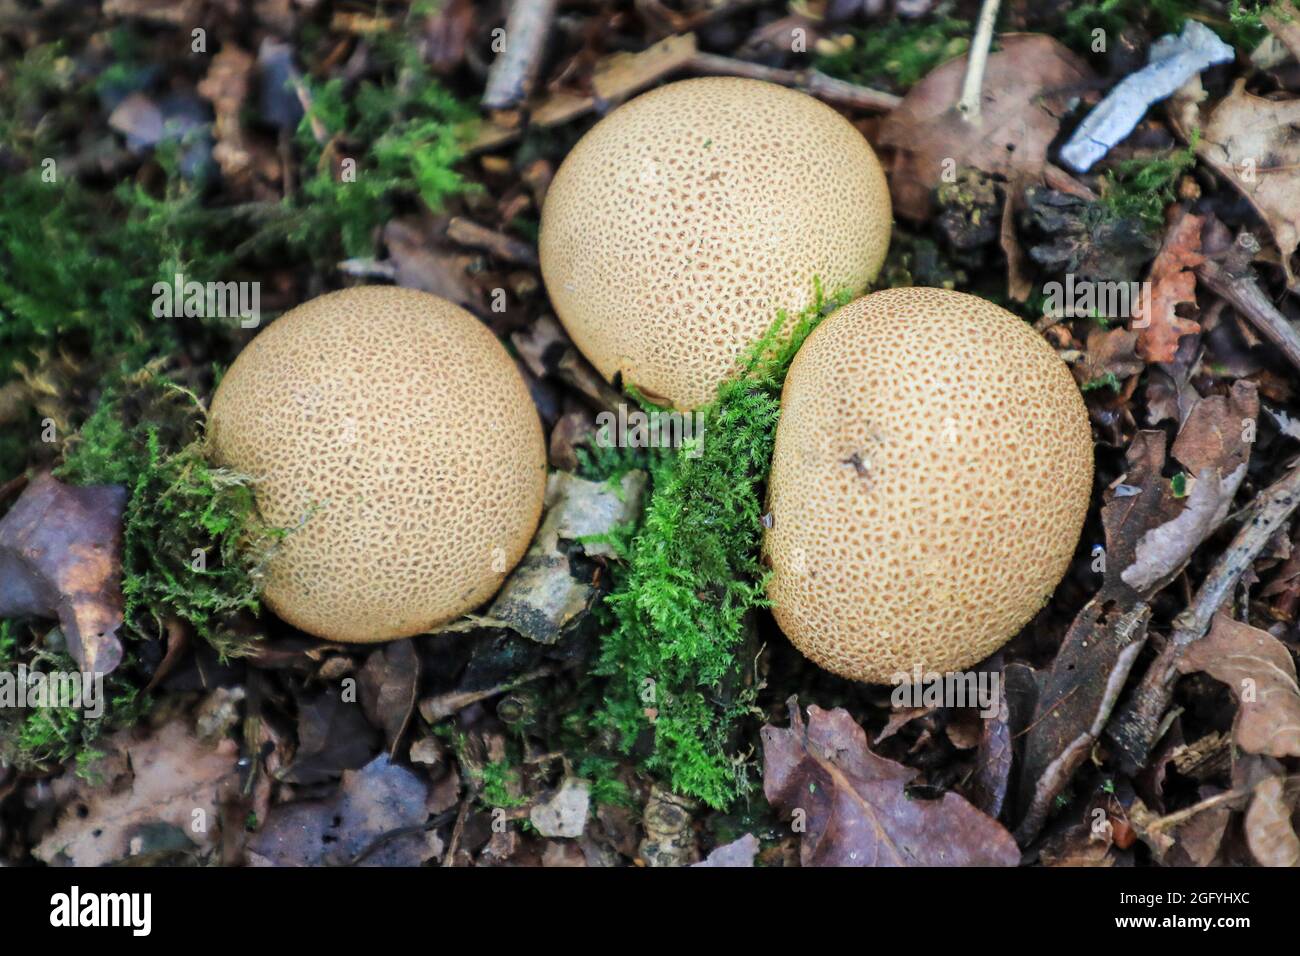 Puffball fungus growing in leaf litter, England, UK Stock Photo